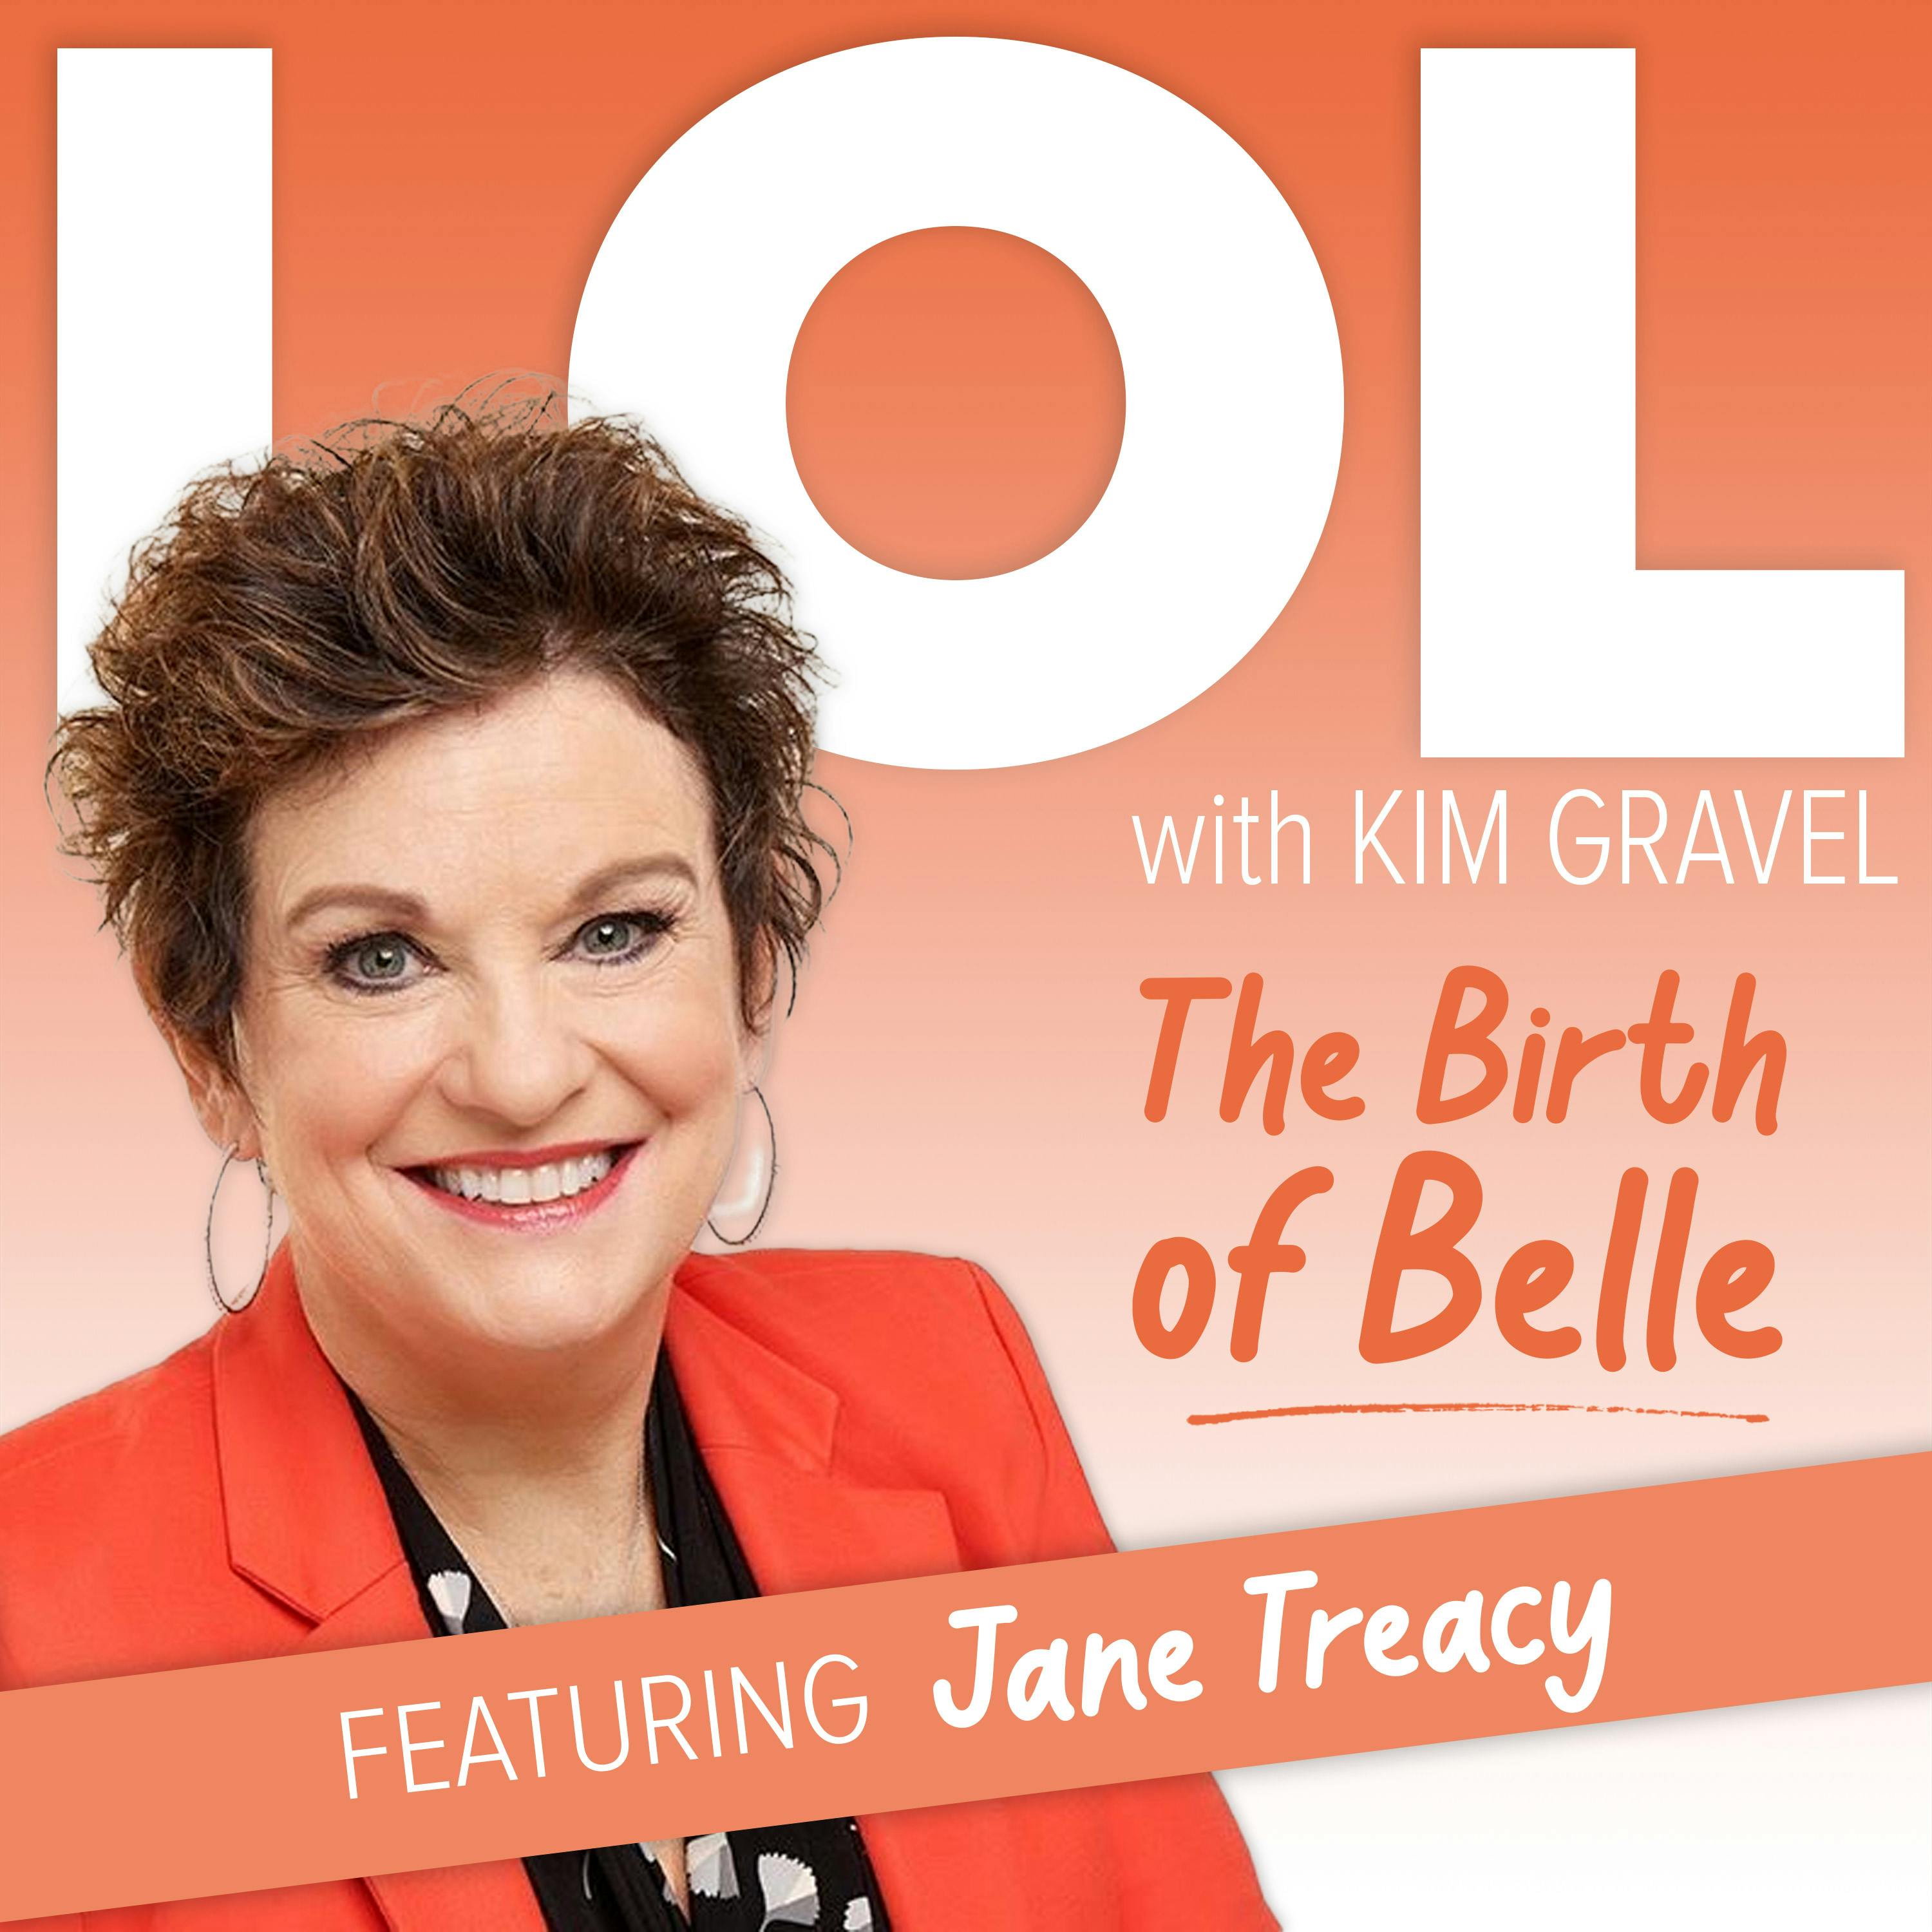 The Birth of Belle with Jane Treacy Image